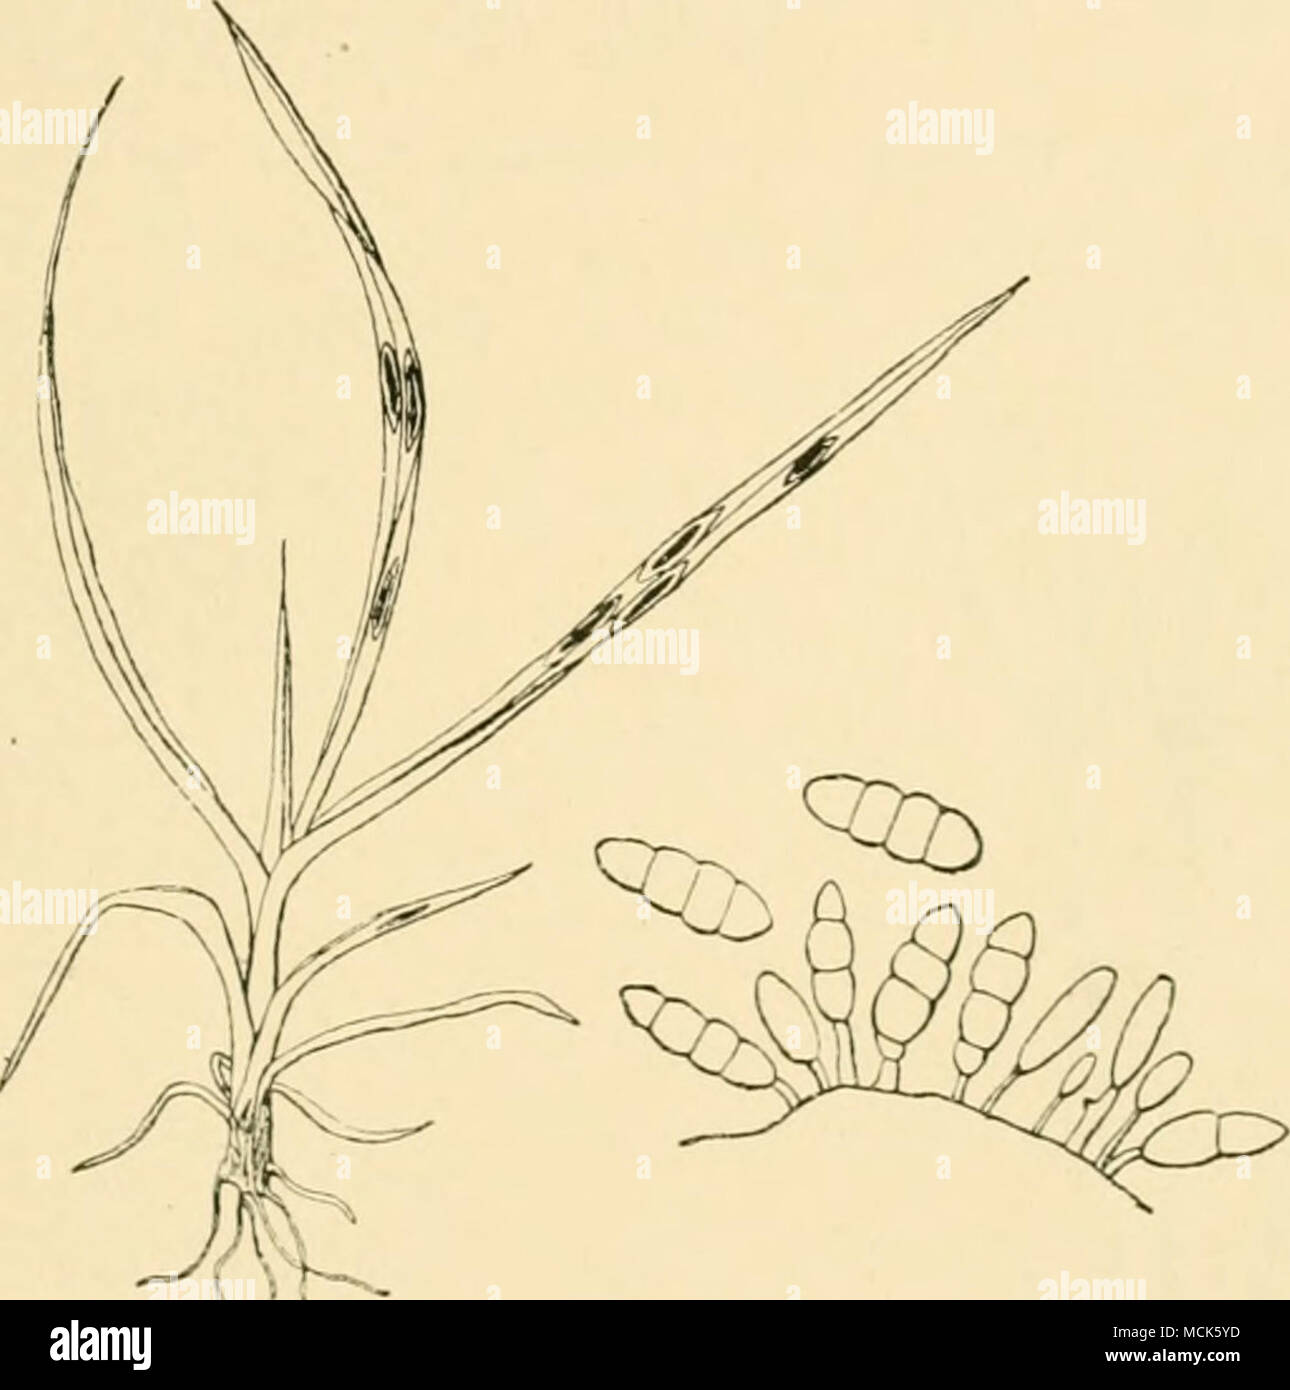 . Fig. 30S.—Mastiriosporium album, (v. Tubeuf del.) conidia. Diseased plants may be found bearing this fungus only, frequently however it is in company with other fungi. Cercosporella. Conidia hyaline, similar to those of Ccrcospora, and produced from simple or branched hyaline conidiophores. Cercosporella persica Sacc. is parasitic on living leaves of peach. In America it has been known since 1890, and receives the name of &quot; frosty mildew.&quot; It causes yellow spots on the lower surface of the leaf. 0. pastinacae Karst. occurs on living leaves of cultivated parsnip. Stock Photo